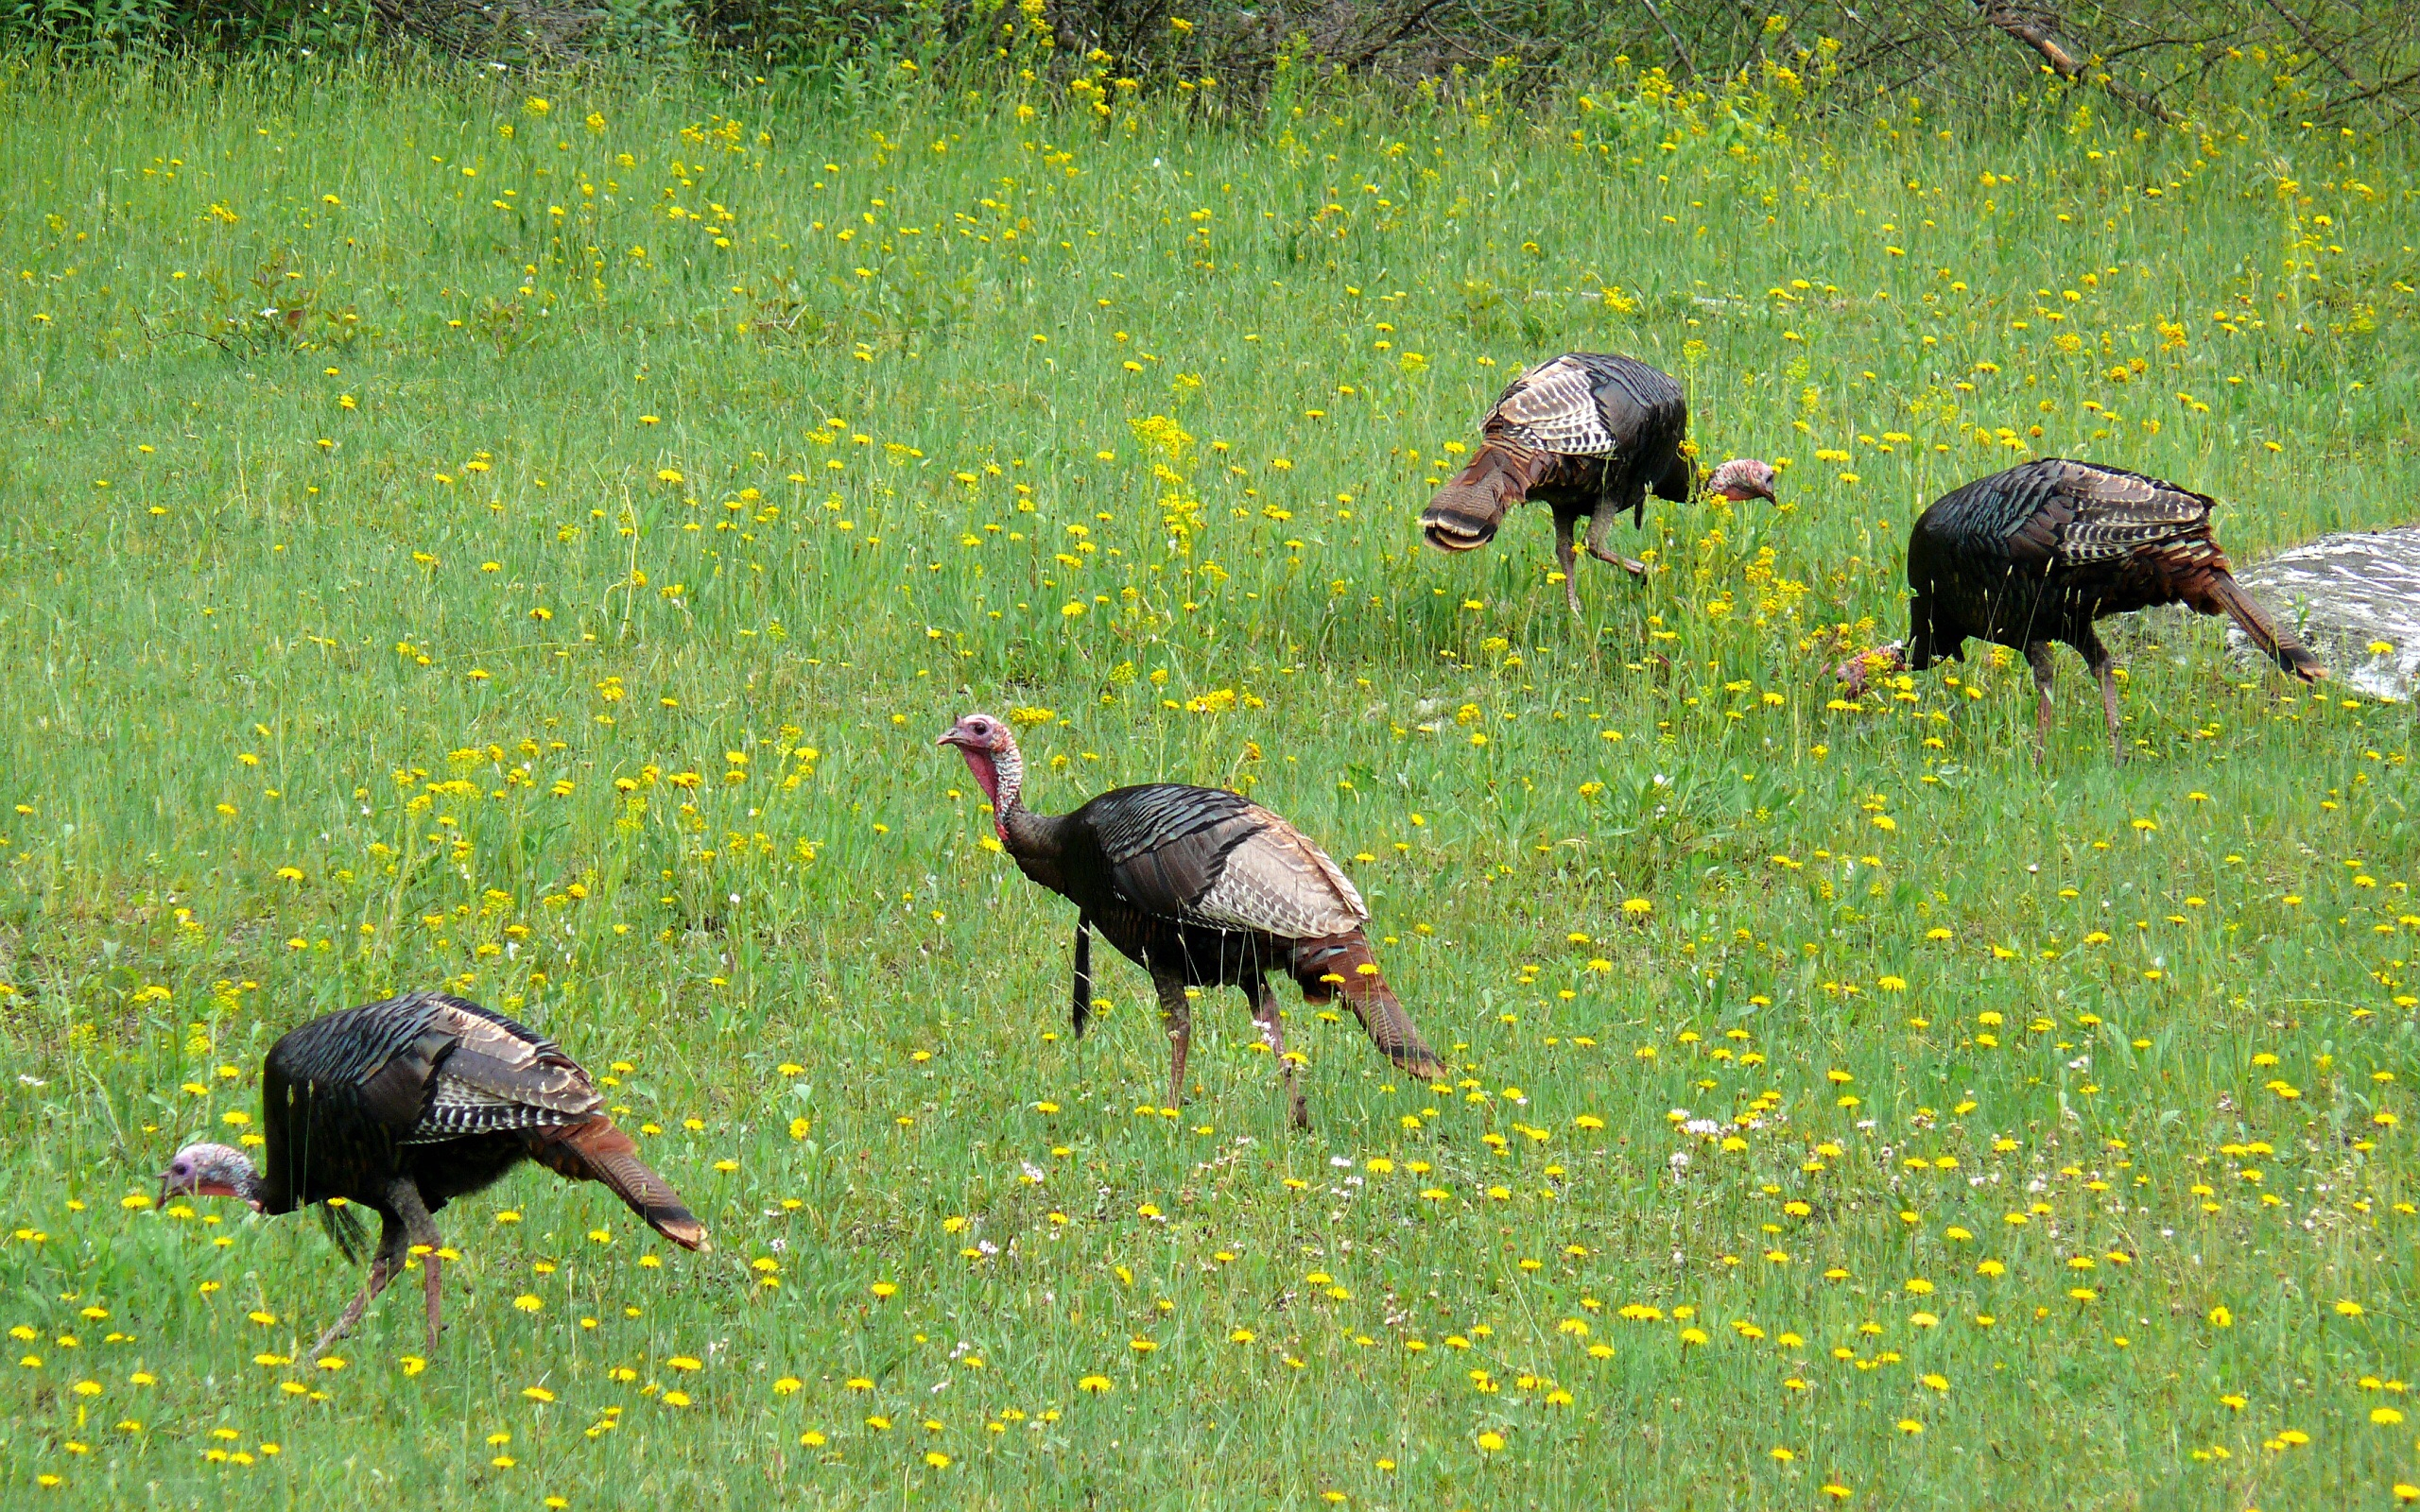 2560x1600 Wild TurkeyMeleagris gallopavo | Help Change The World. The Future Of The County Is Now